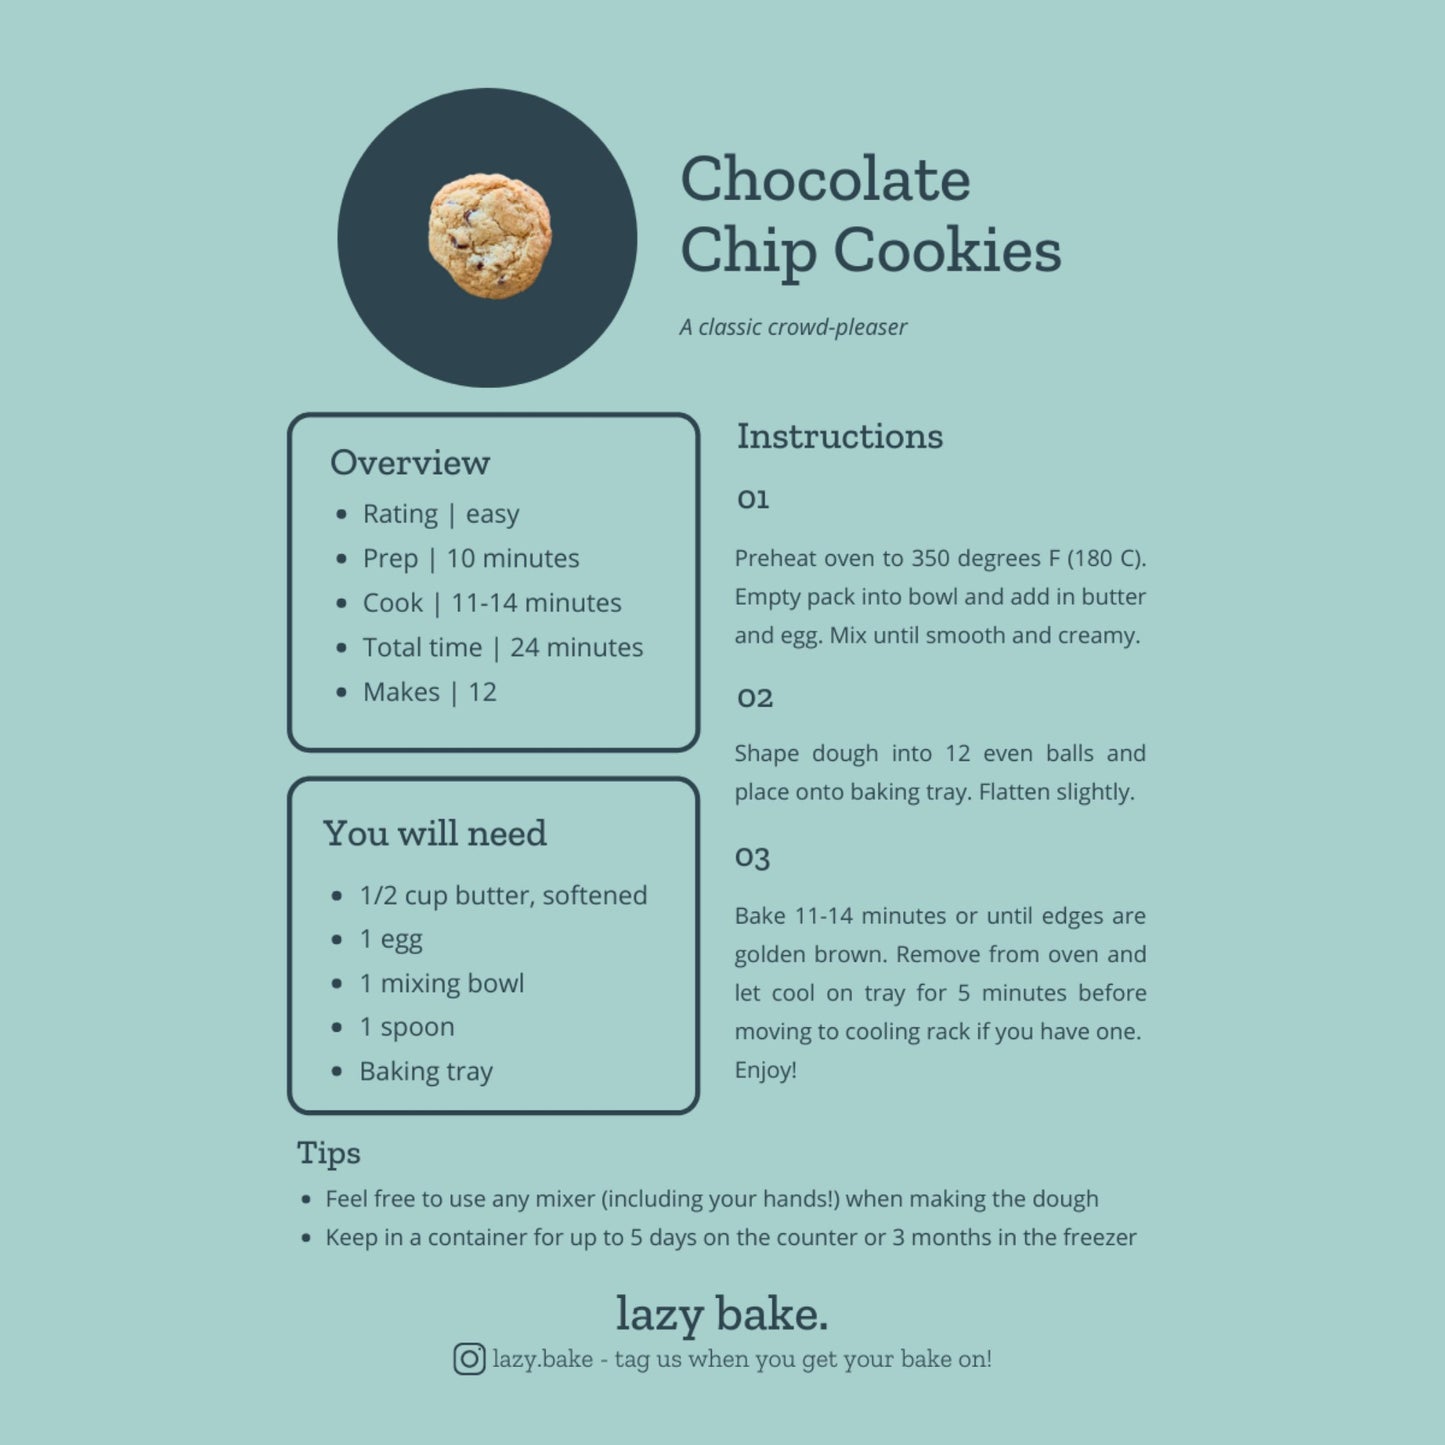 Chocolate Chip Cookies - Lazy Bake